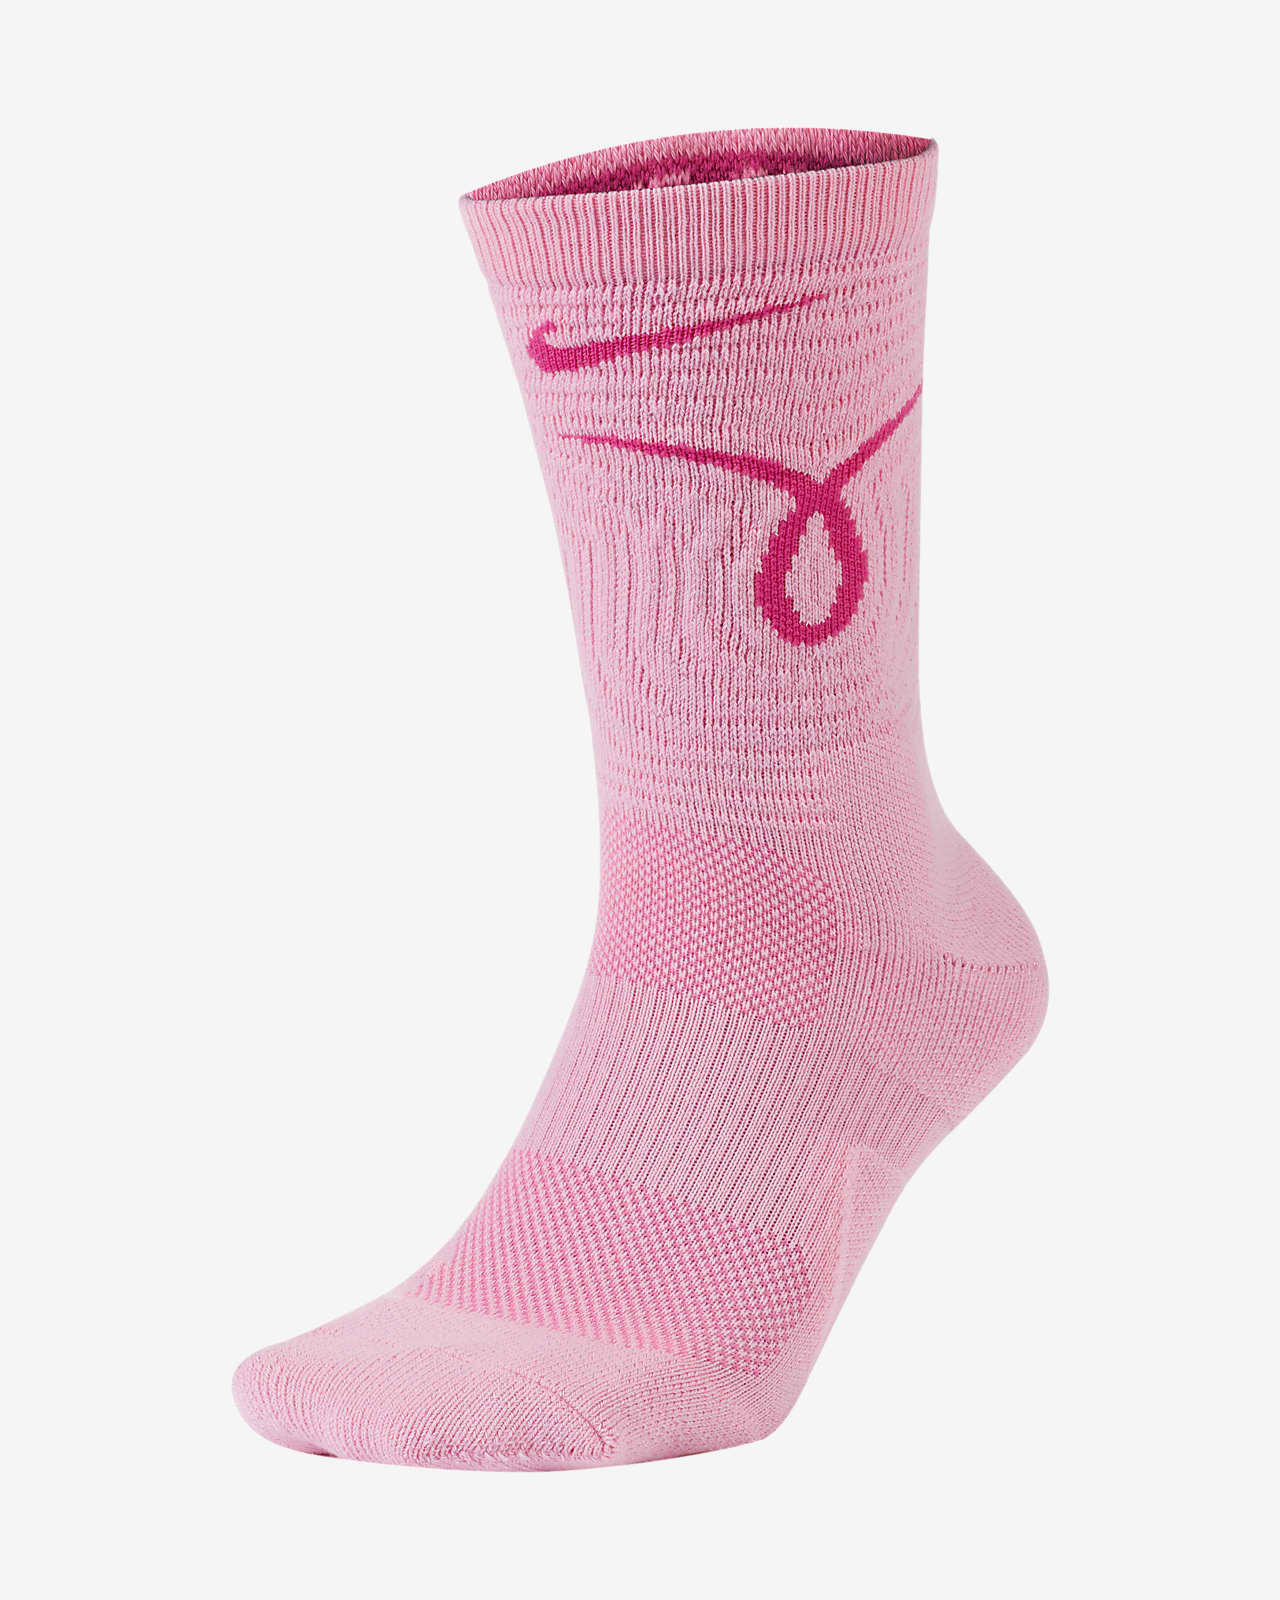 Sock Cancer And Help Find A Cure